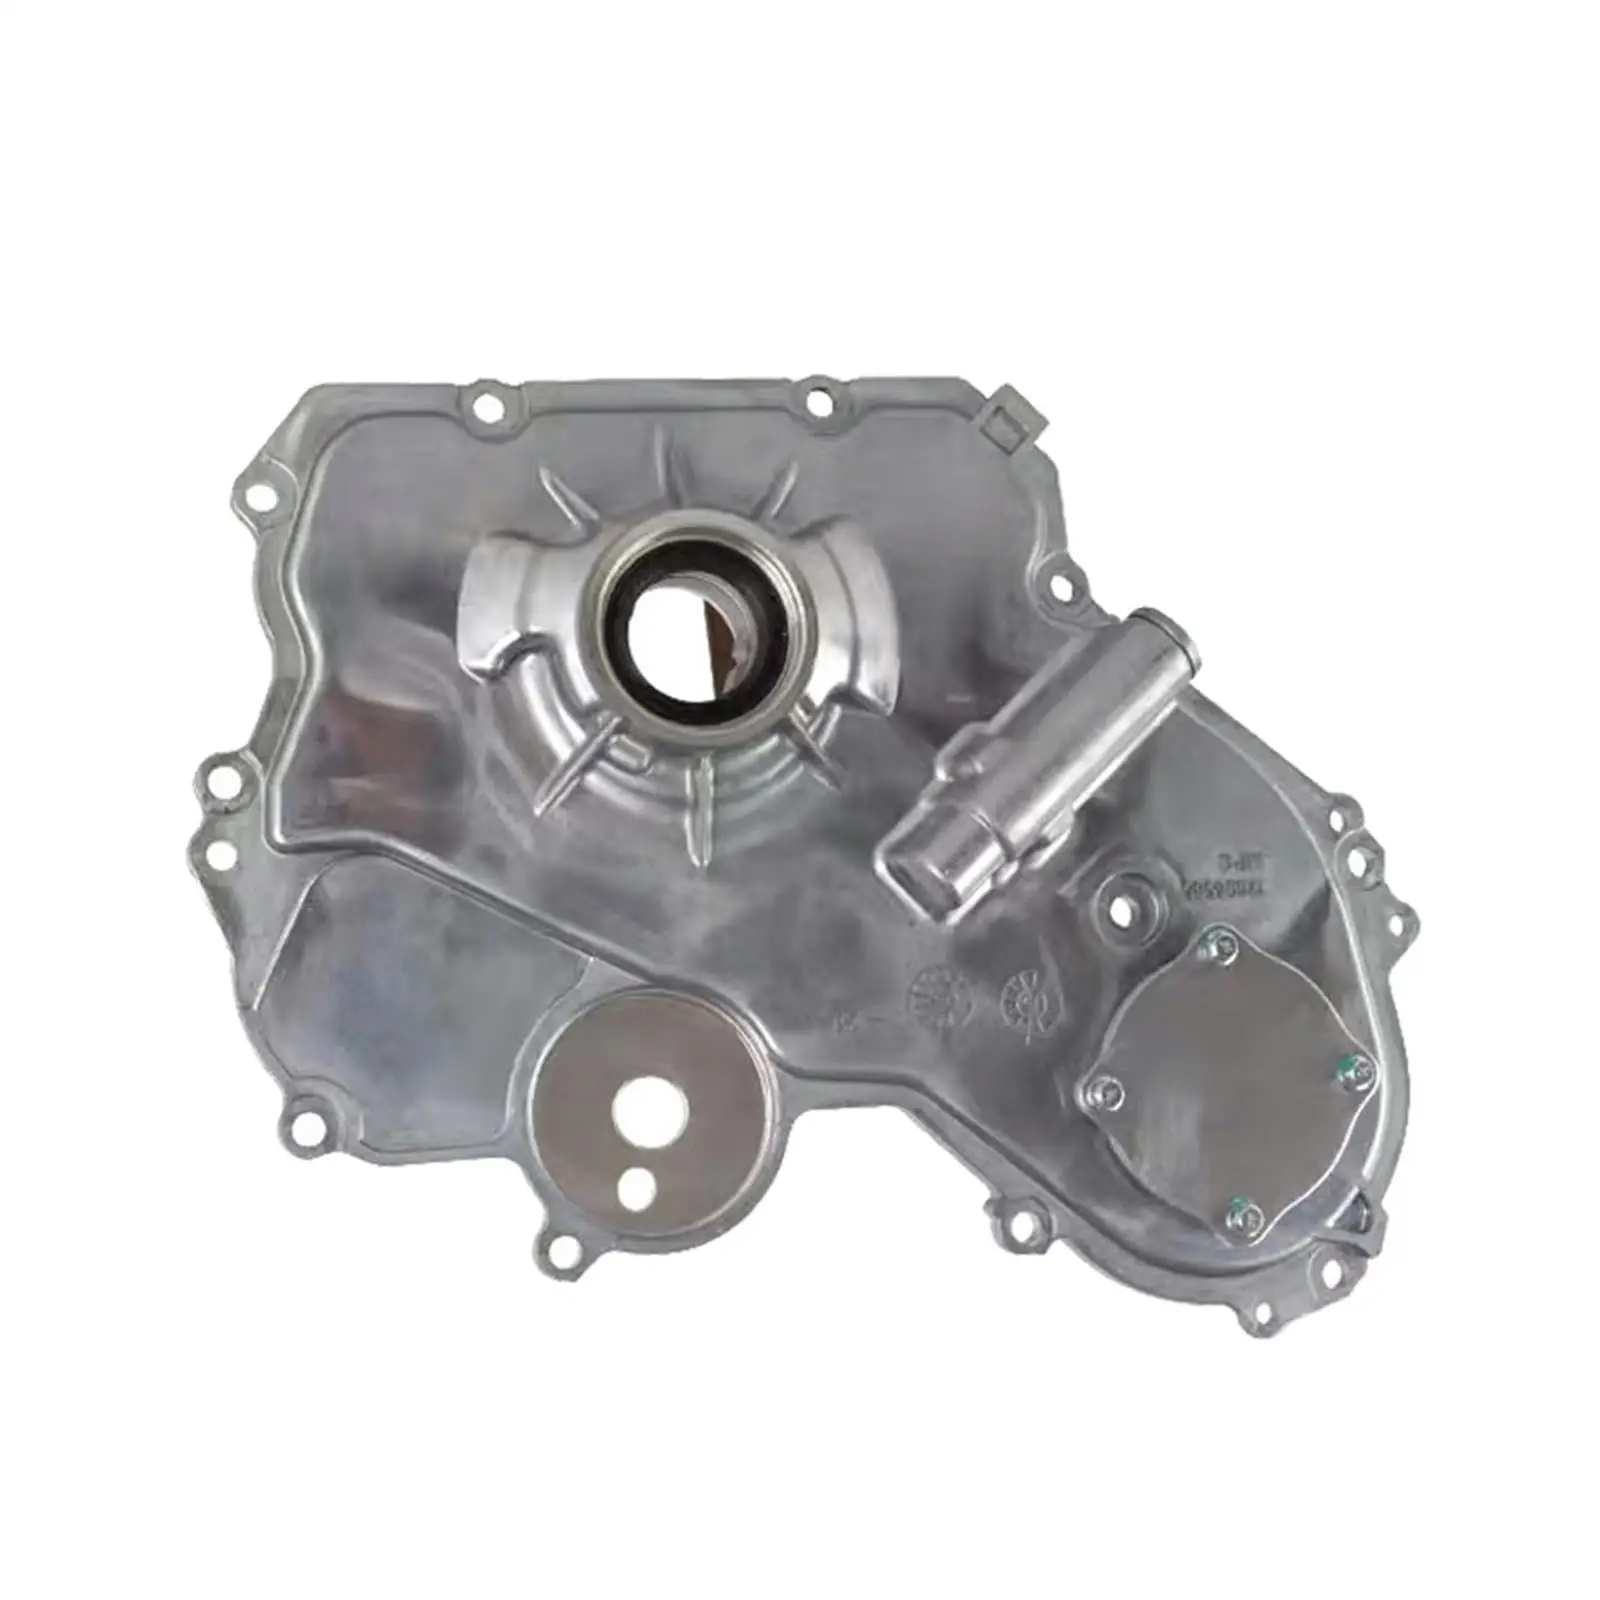 12584621 Engine Oil Pump Repair Parts 90537914 12606580 for Regal Verano Durable Easy to Install Car Accessories